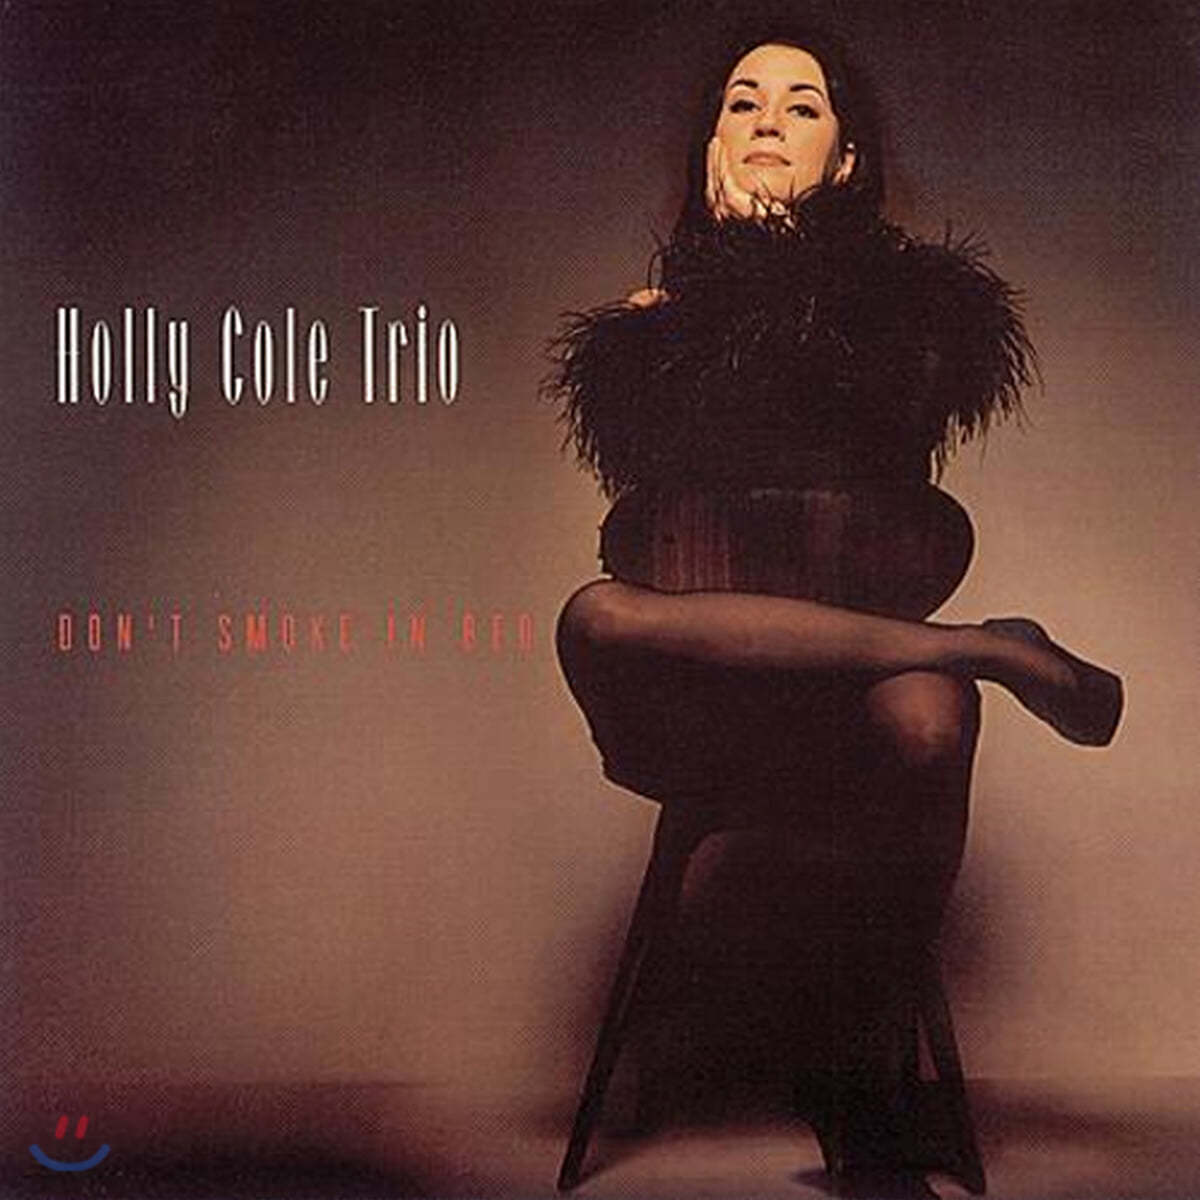 Holly Cole Trio (홀리 콜 트리오) - Don't Smoke In Bed [2LP]